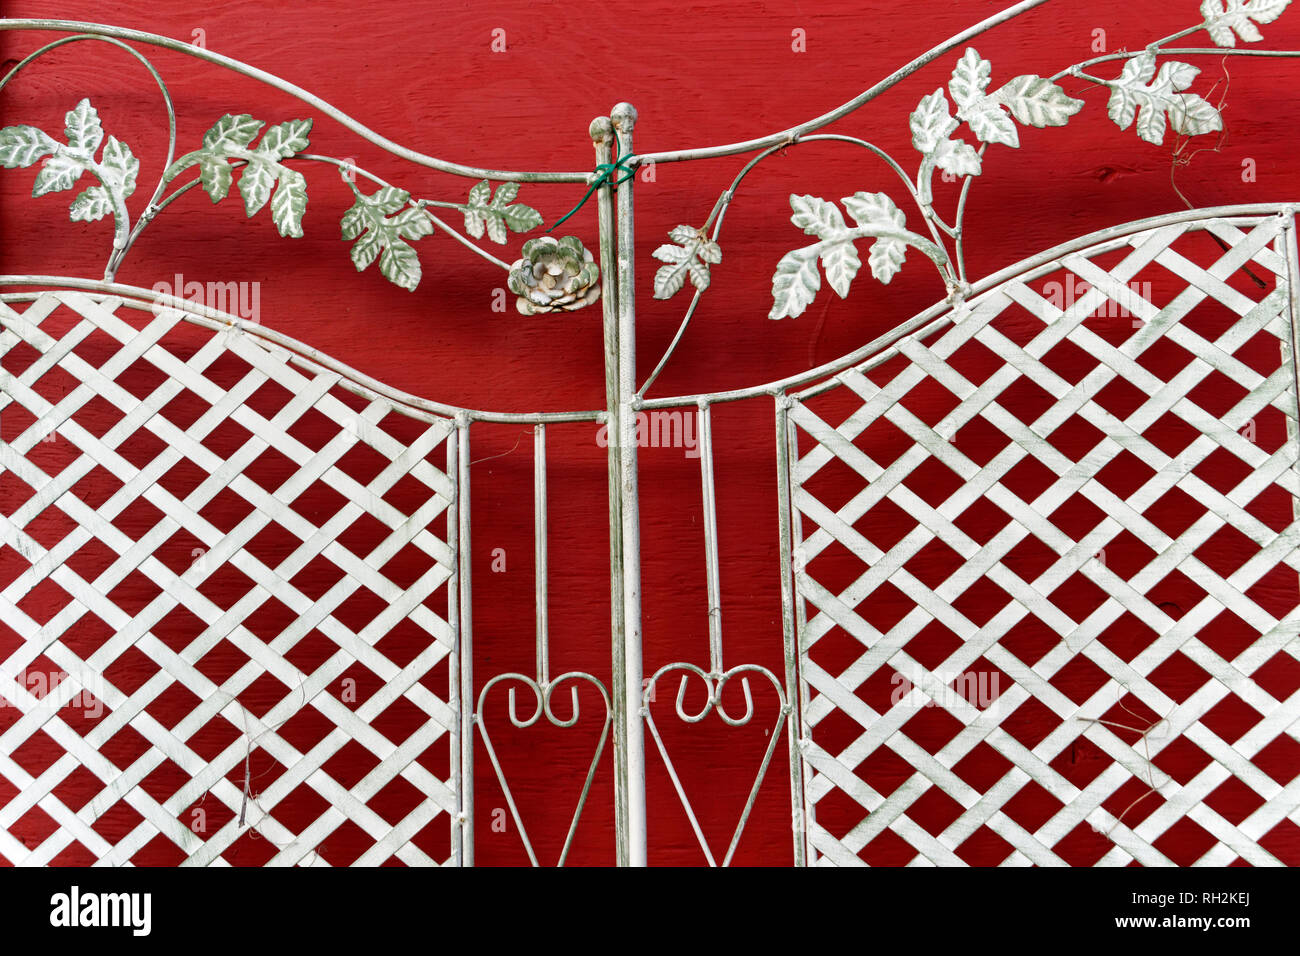 Ornate metal grill work with decorative floral design, hearts, and lattice against a  red wall Stock Photo